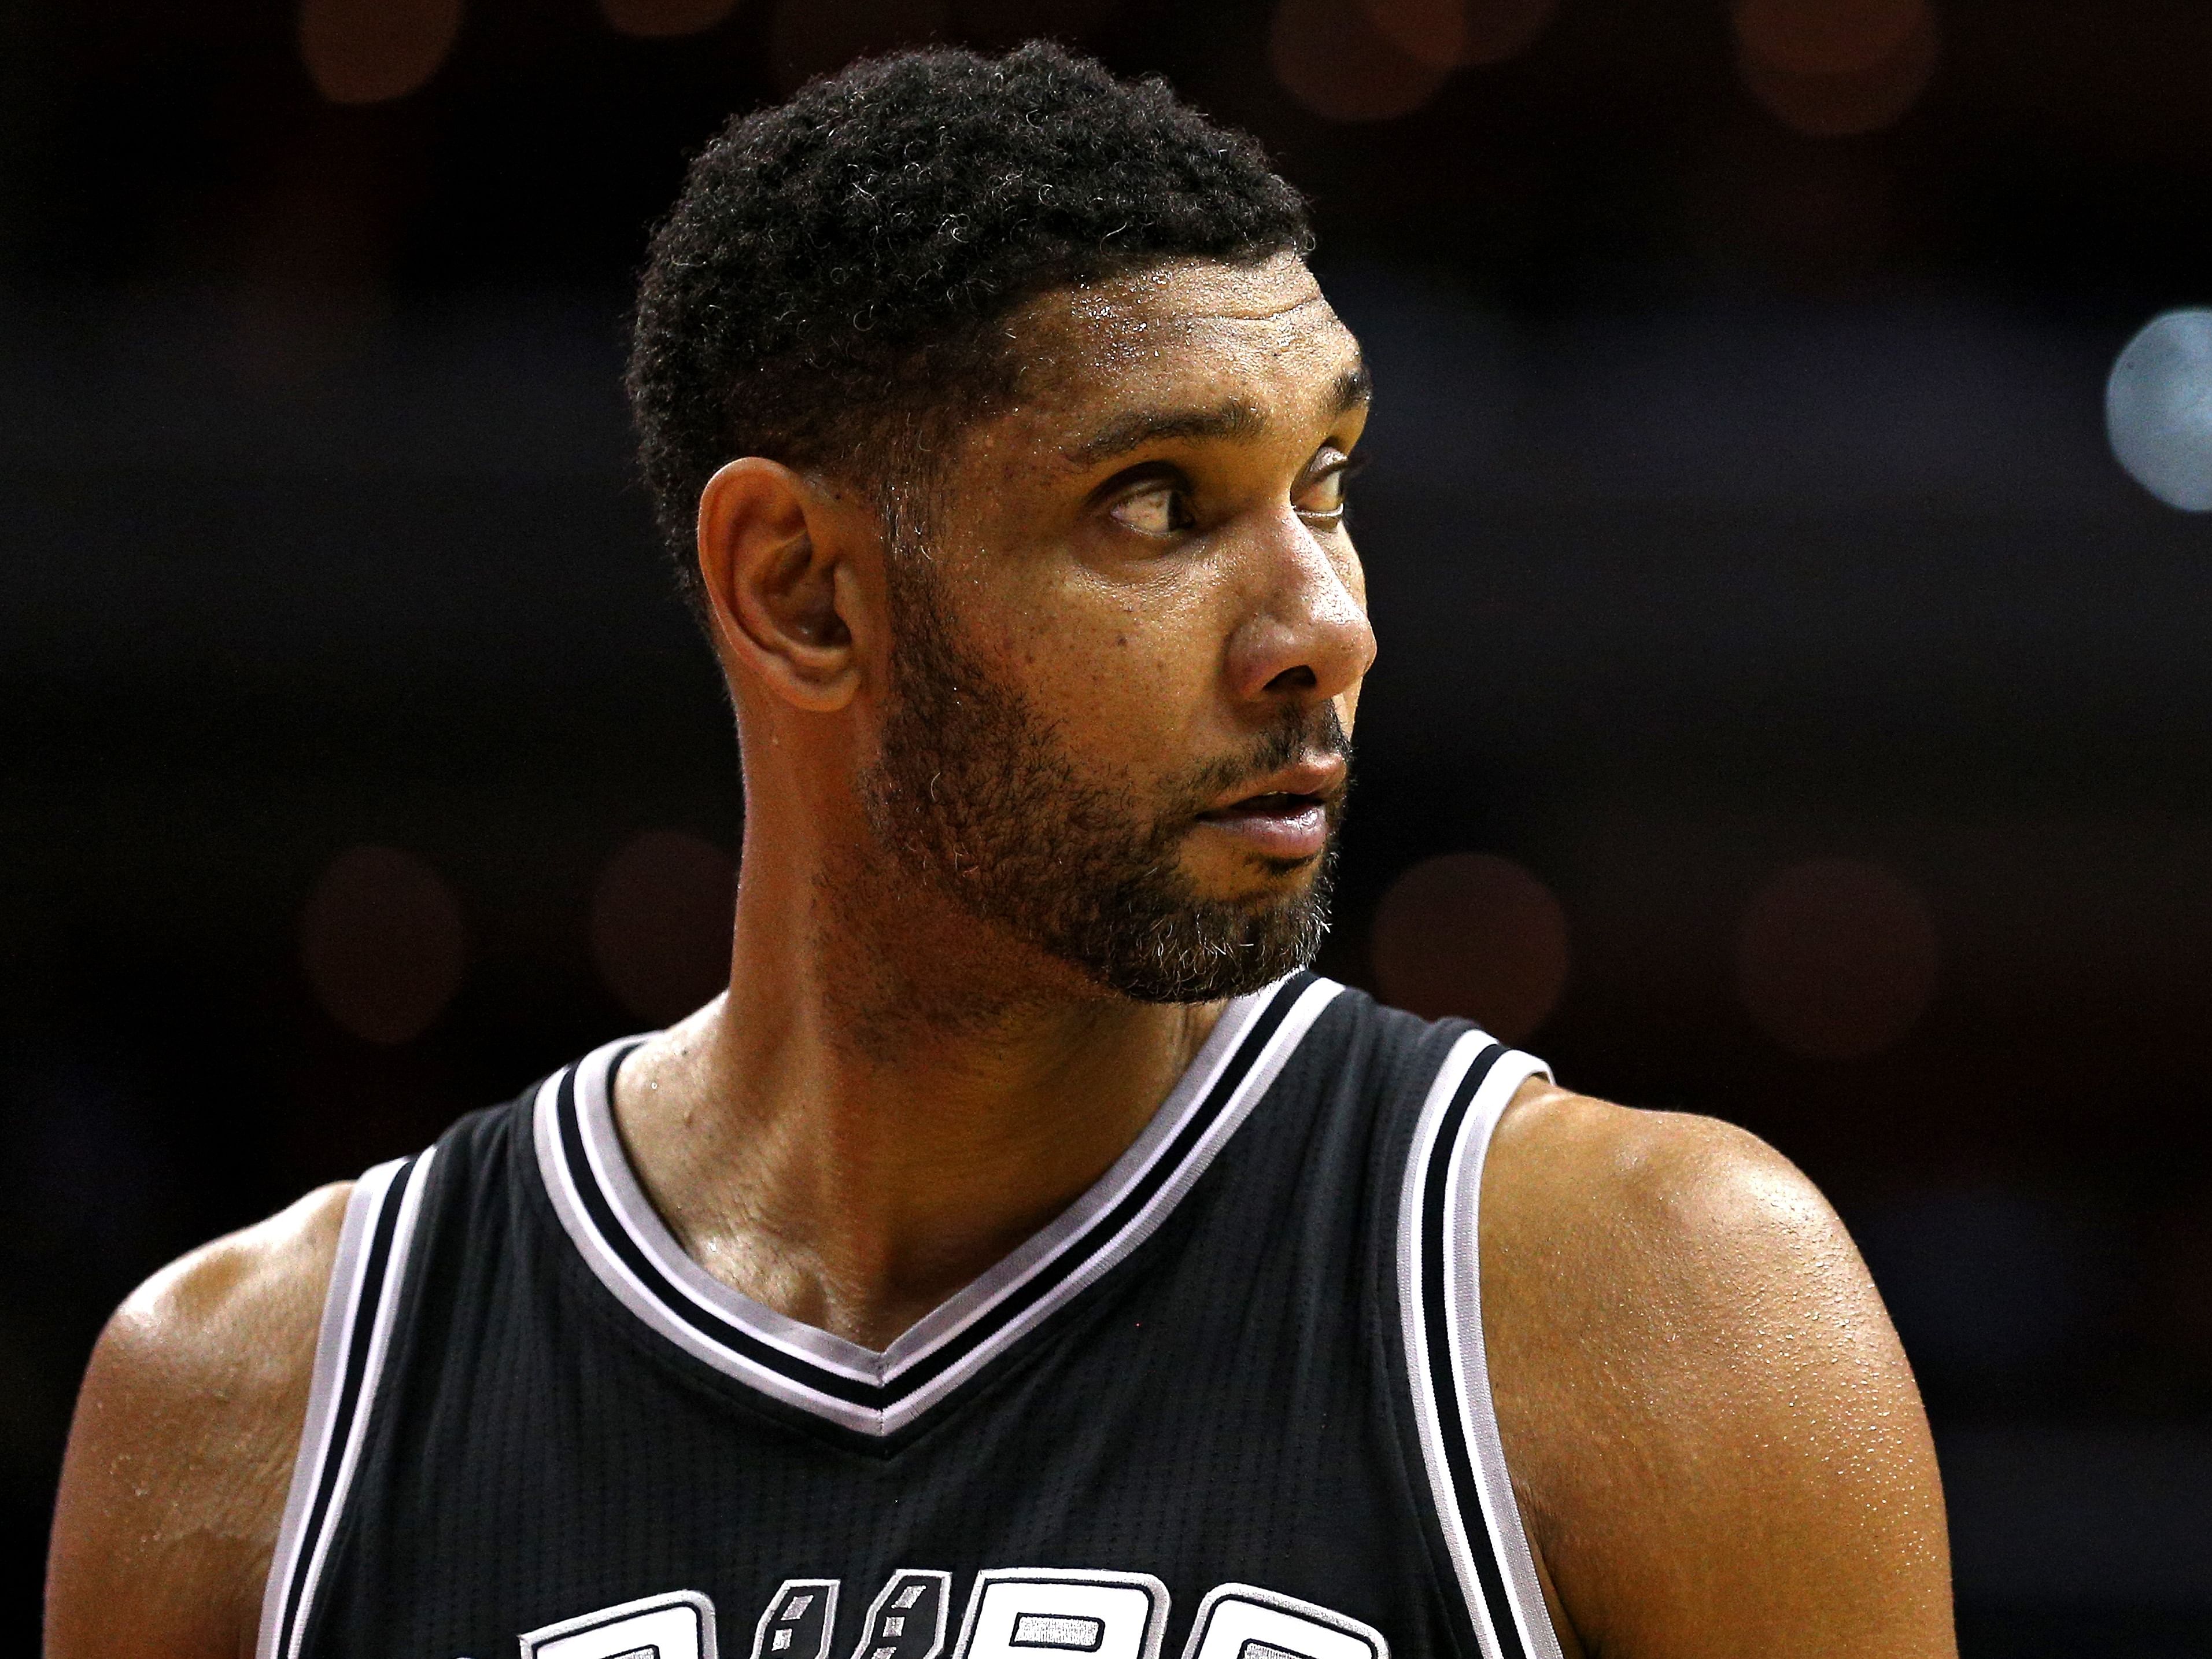 Tim Duncan spars with MMA fighter